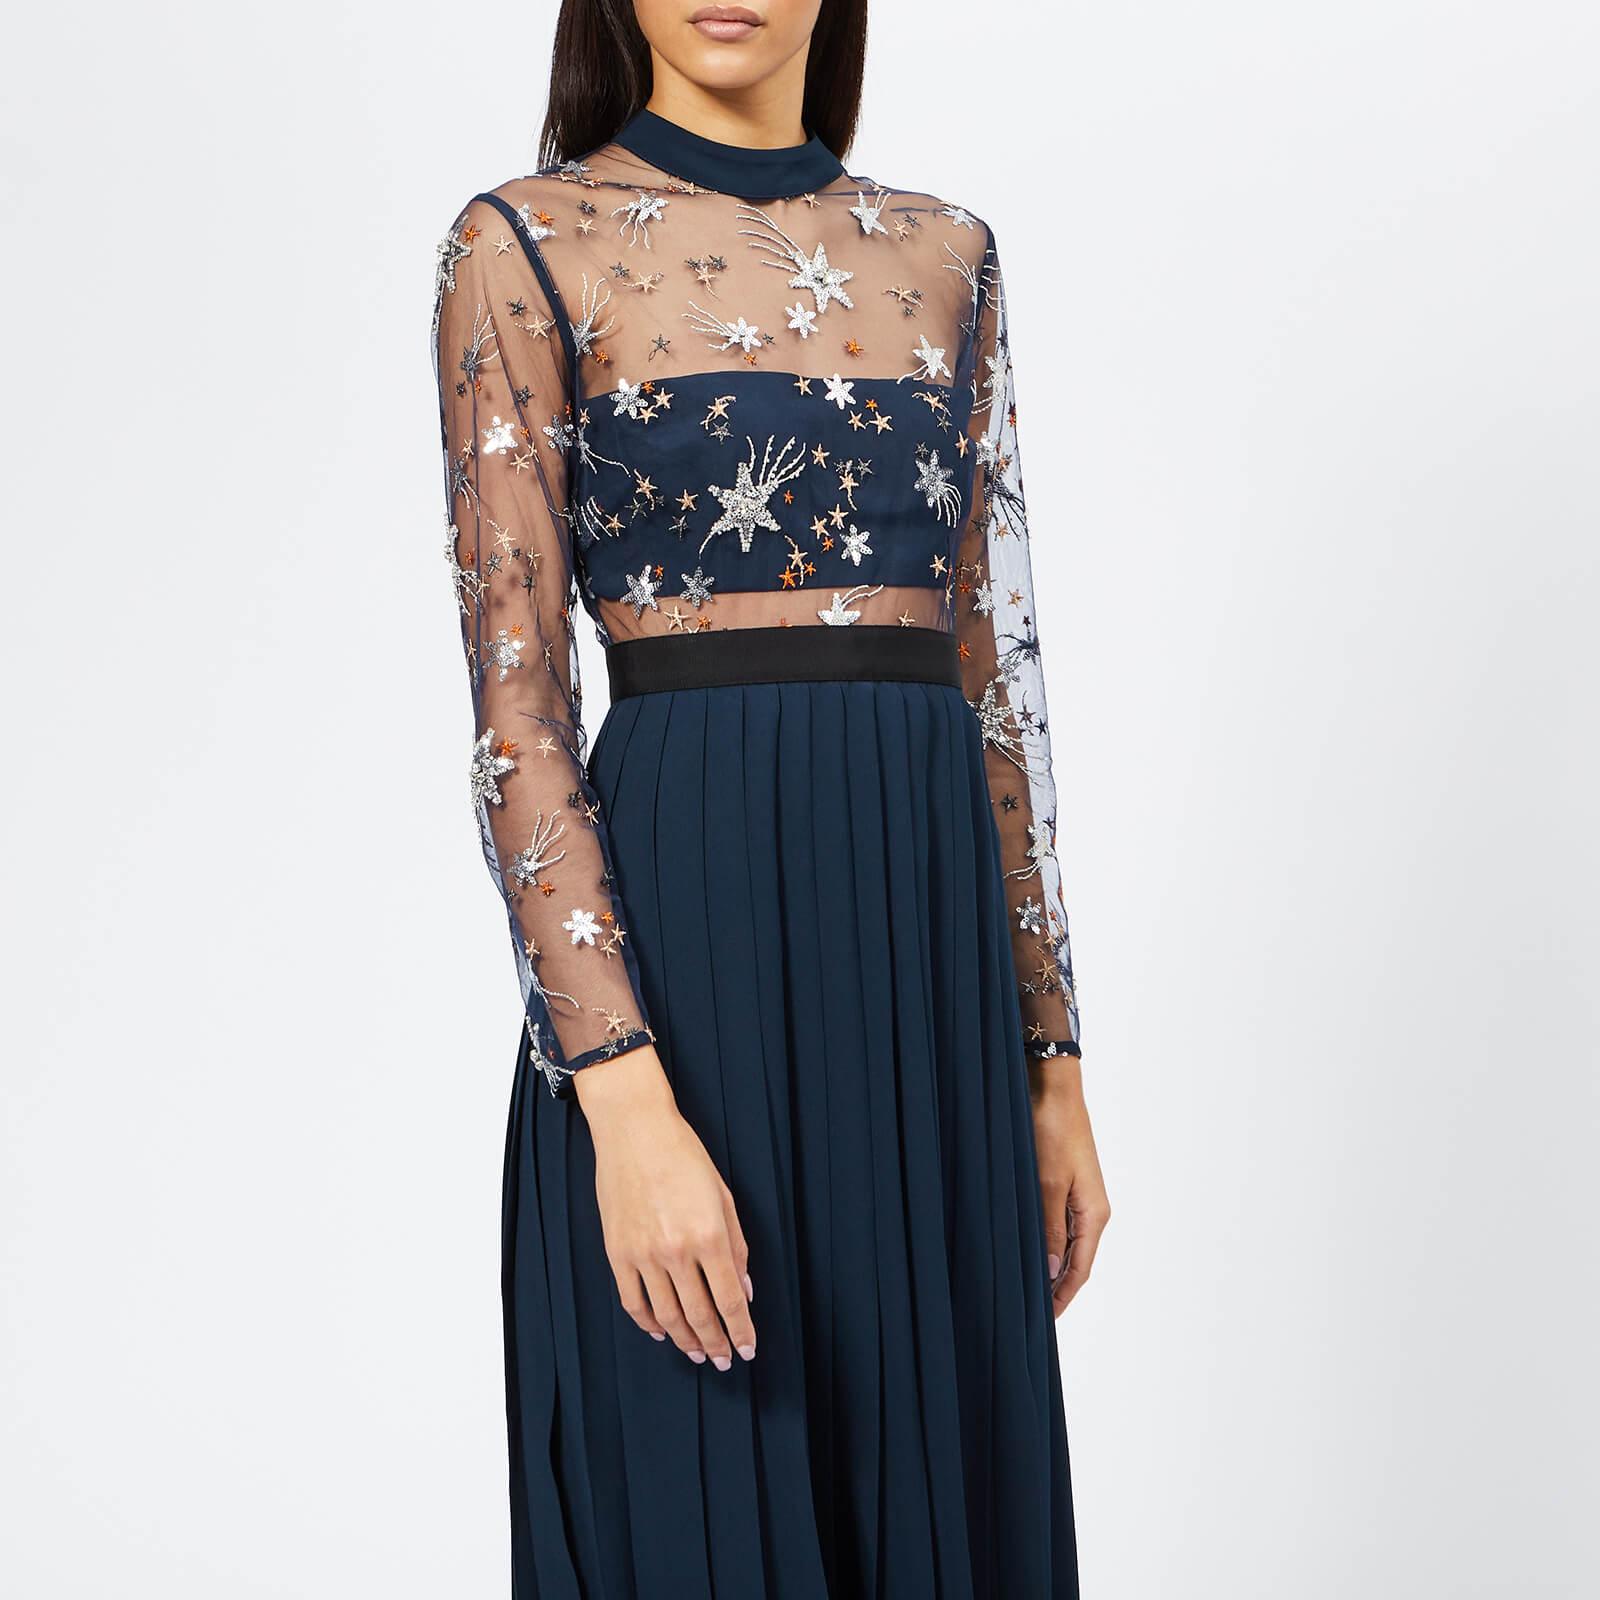 Self-Portrait Star Tulle Embellished Maxi Dress in Navy (Blue) - Lyst